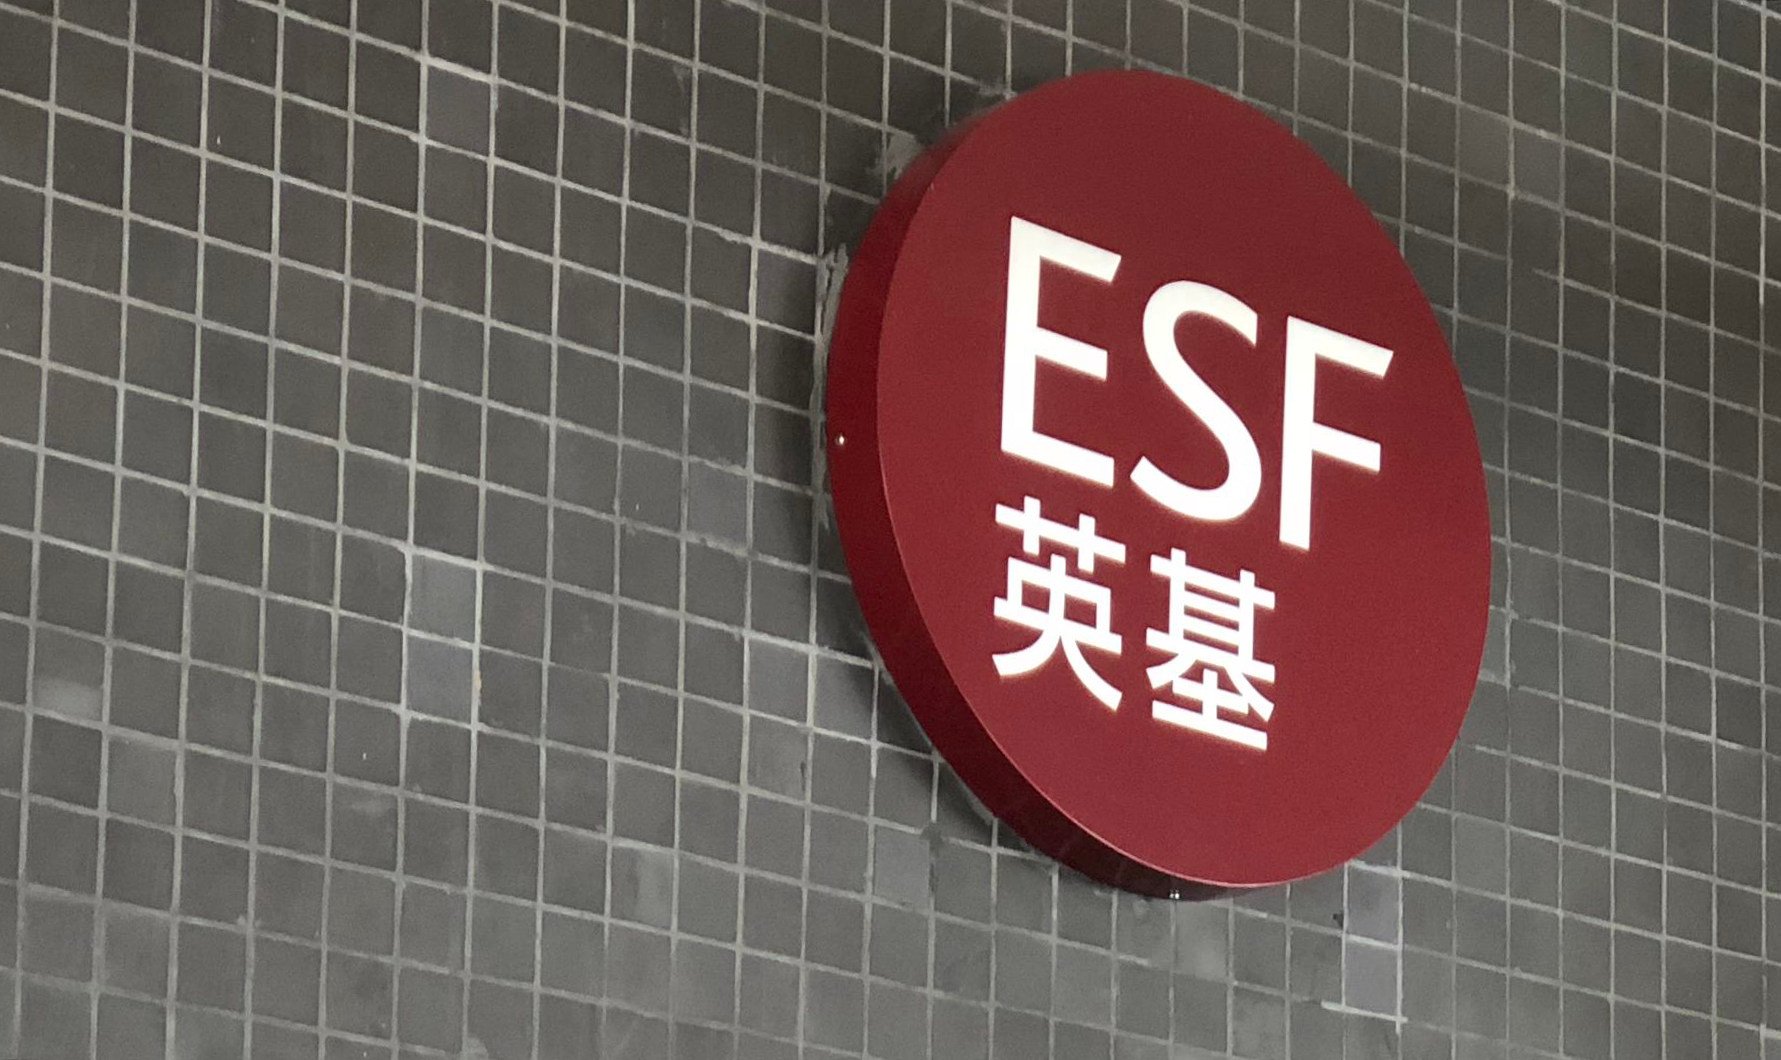 The ESF is the largest English-language international school organisation in Hong Kong. Photo: Handout